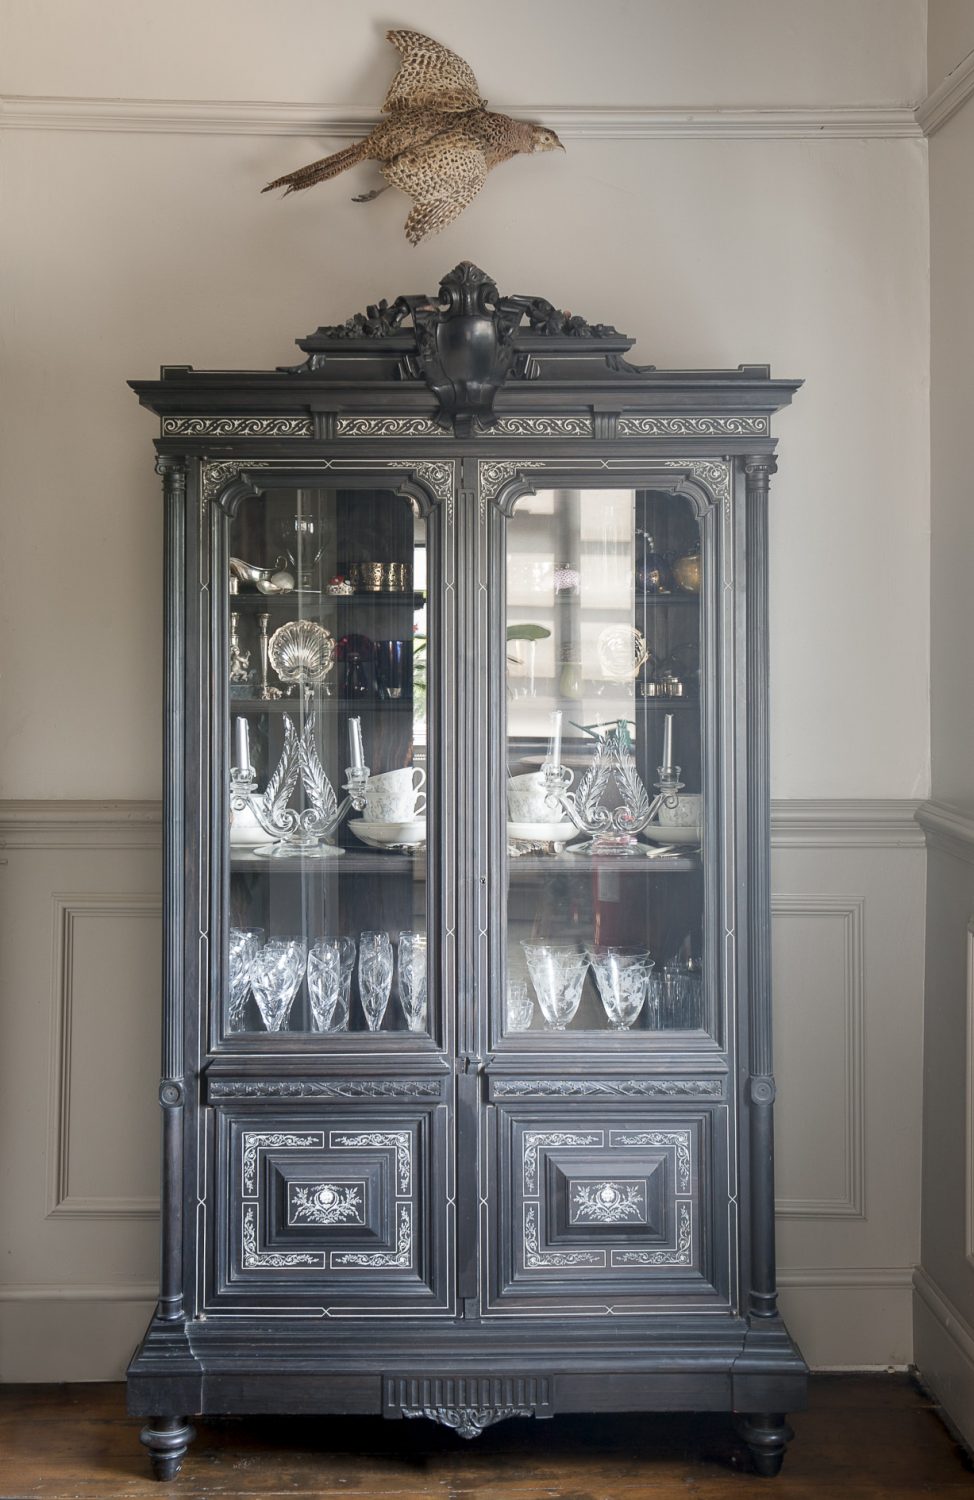 A glass-fronted ebonite cabinet was bought for ‘virtually nothing’ from Bentley’s auction in Cranbrook. Taxidermy dotted around the home is a reminder of its former life as a country pub and coaching inn